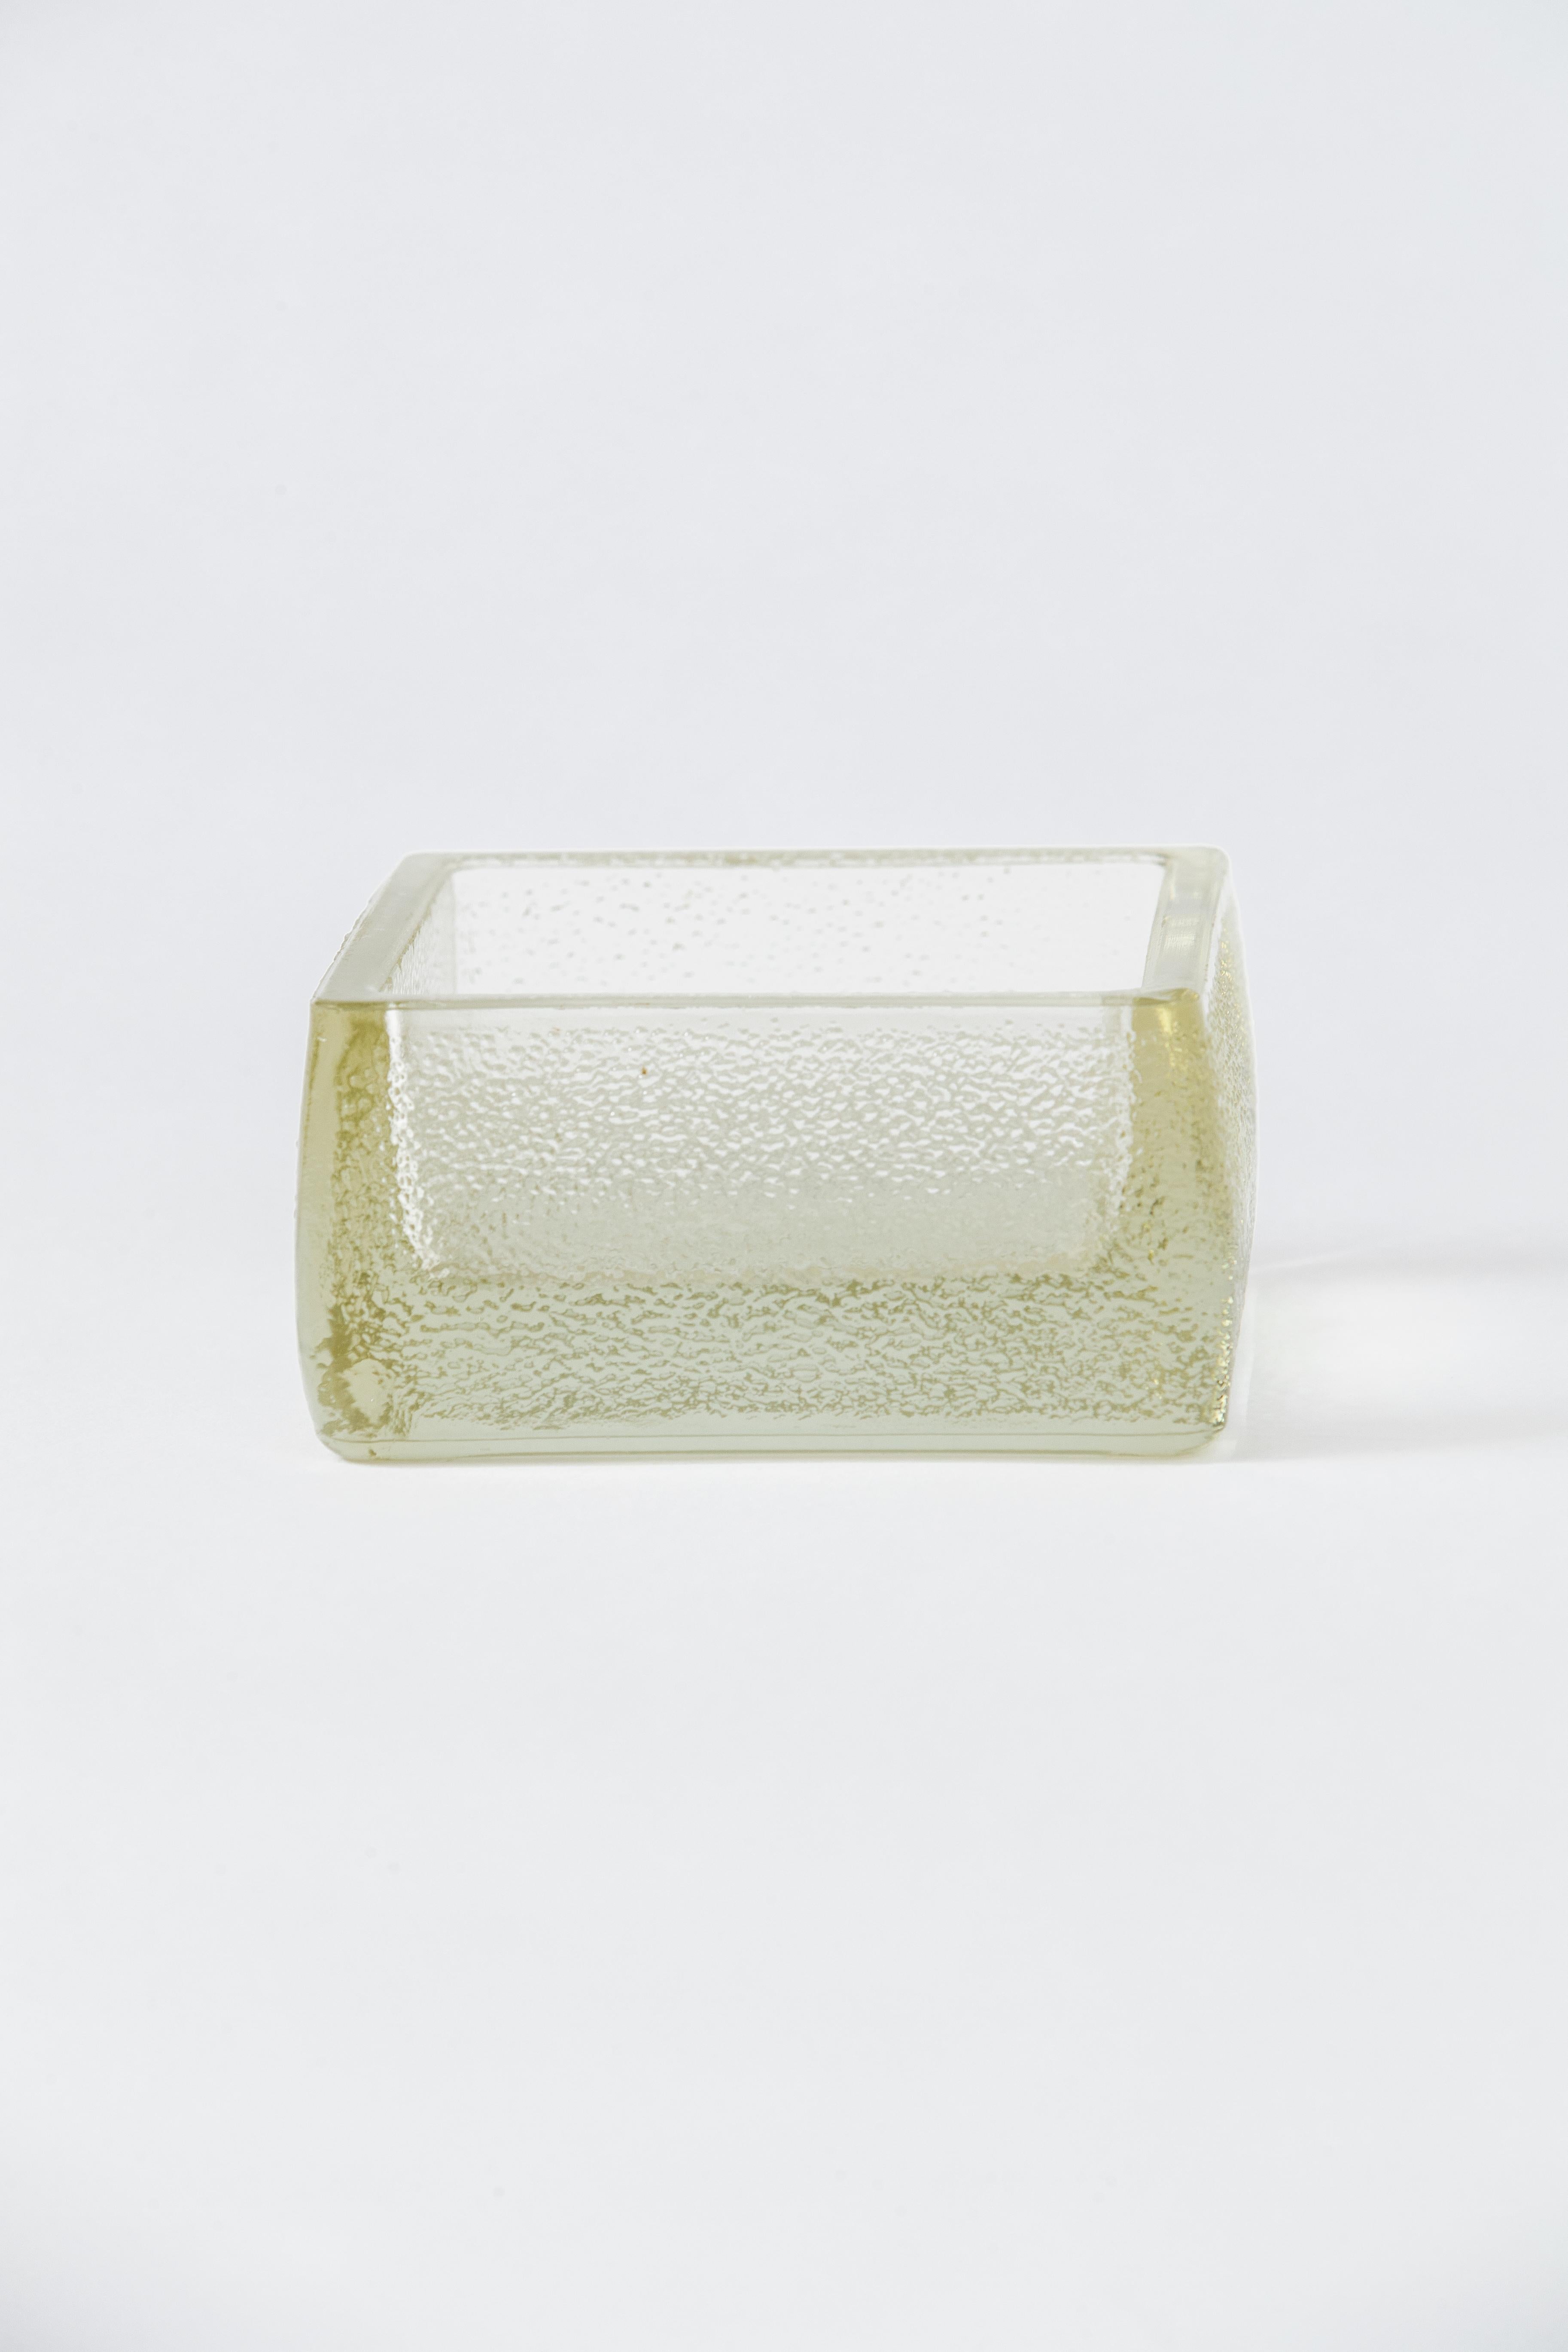 Mid-20th Century Green Cast Glass Vide-Poche by Lumax, France 1960s